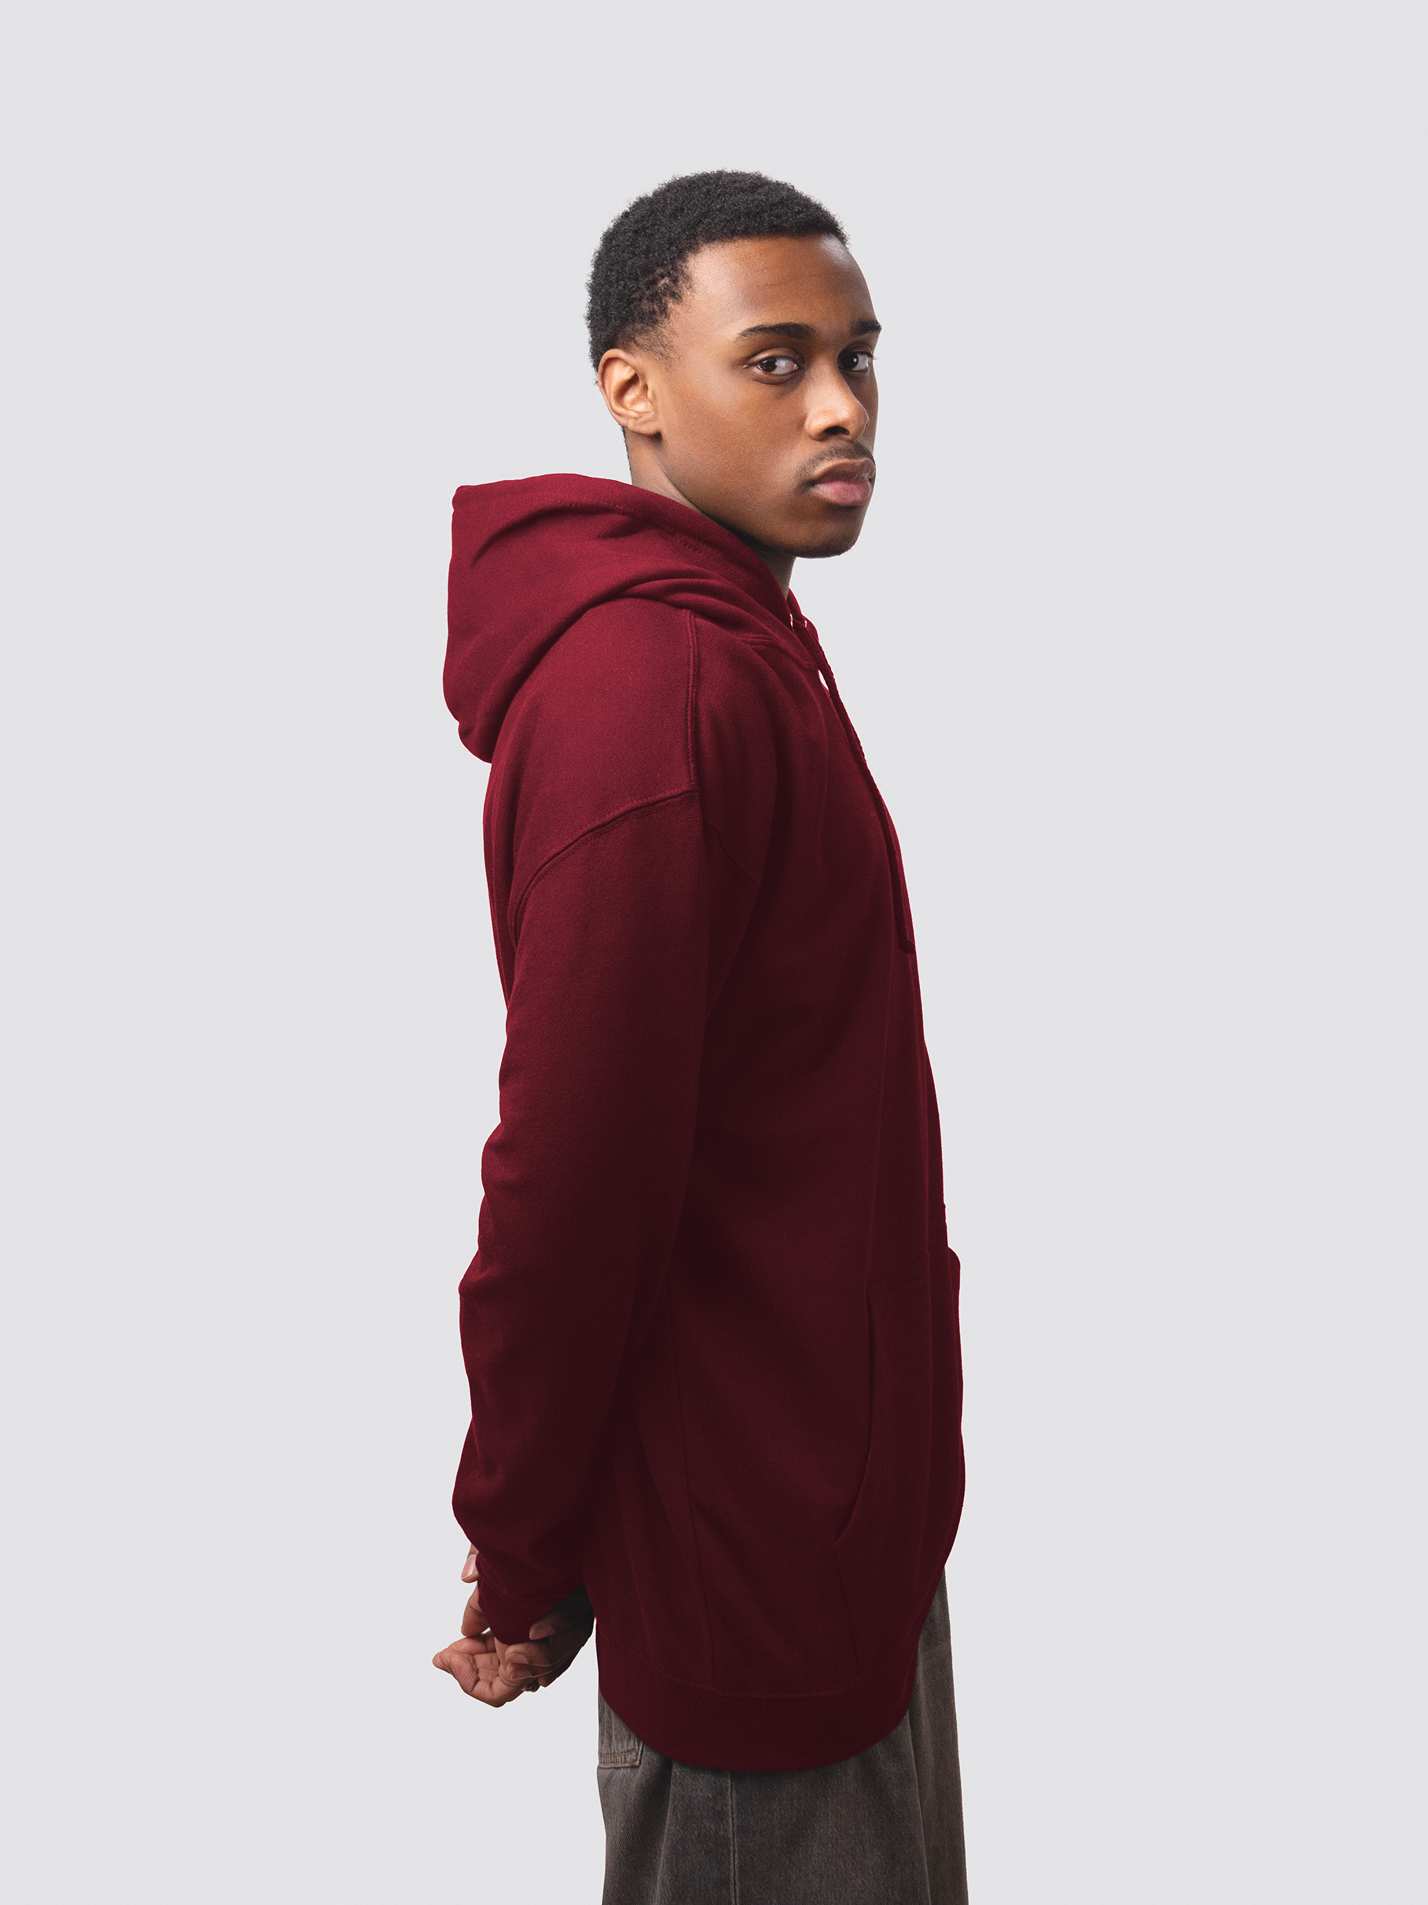 Clare Hall College hoodie, made from burgundy cotton-faced fabric